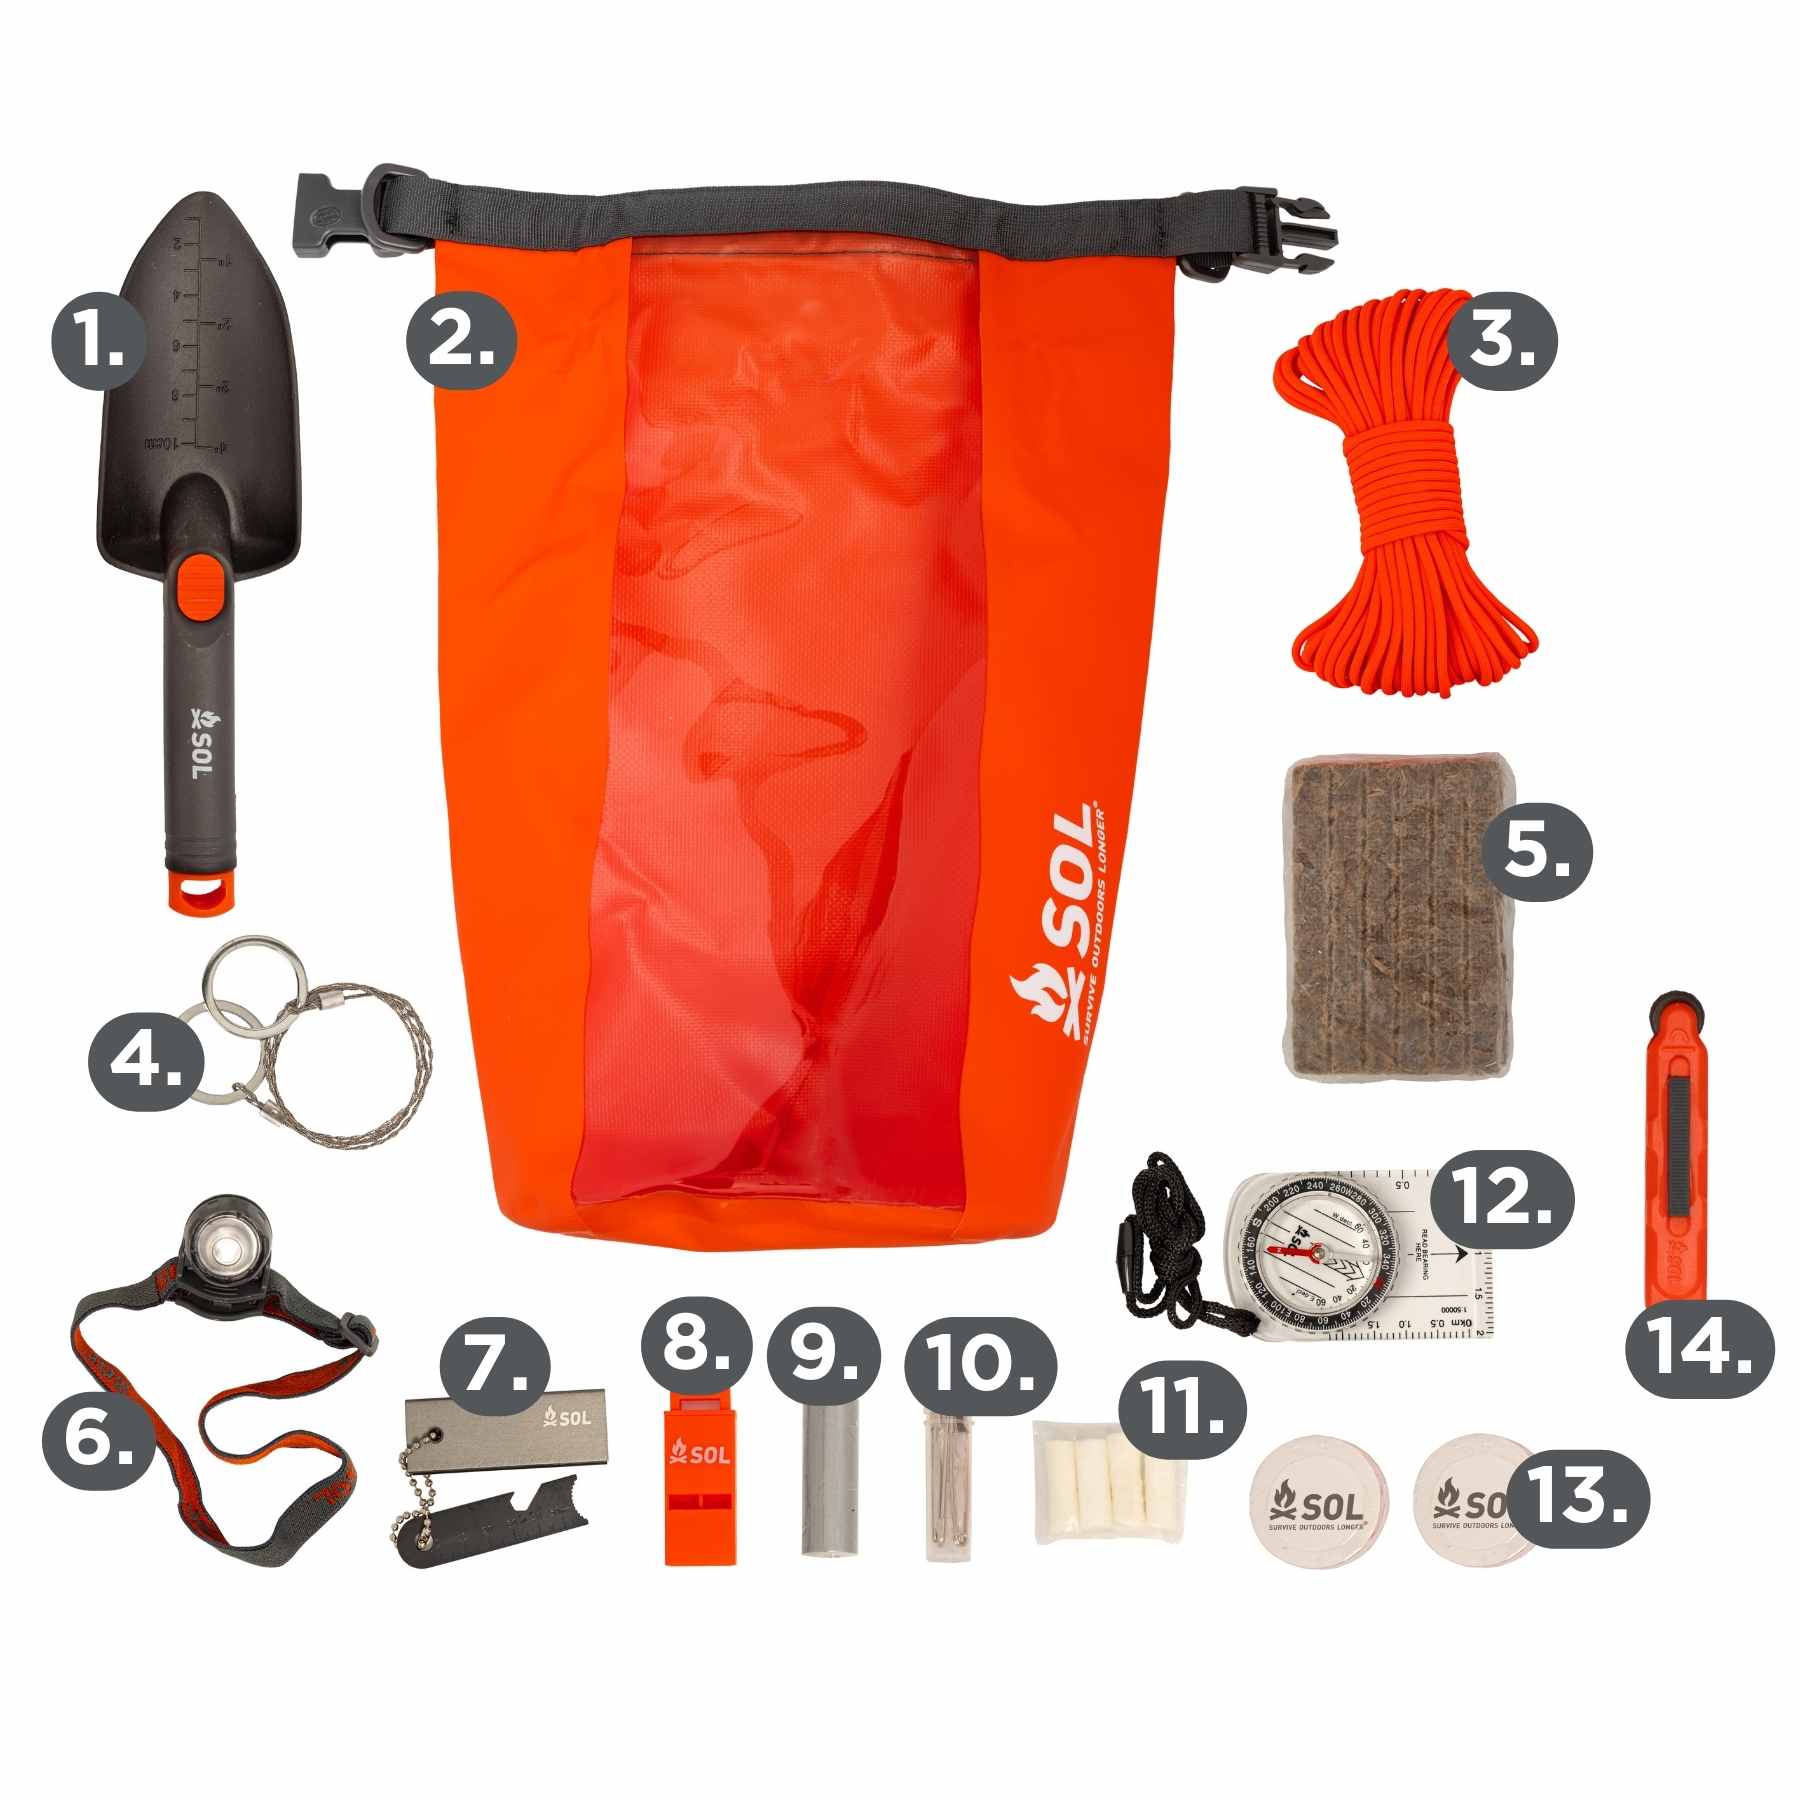 Camp Ready Kit Numbered Contents